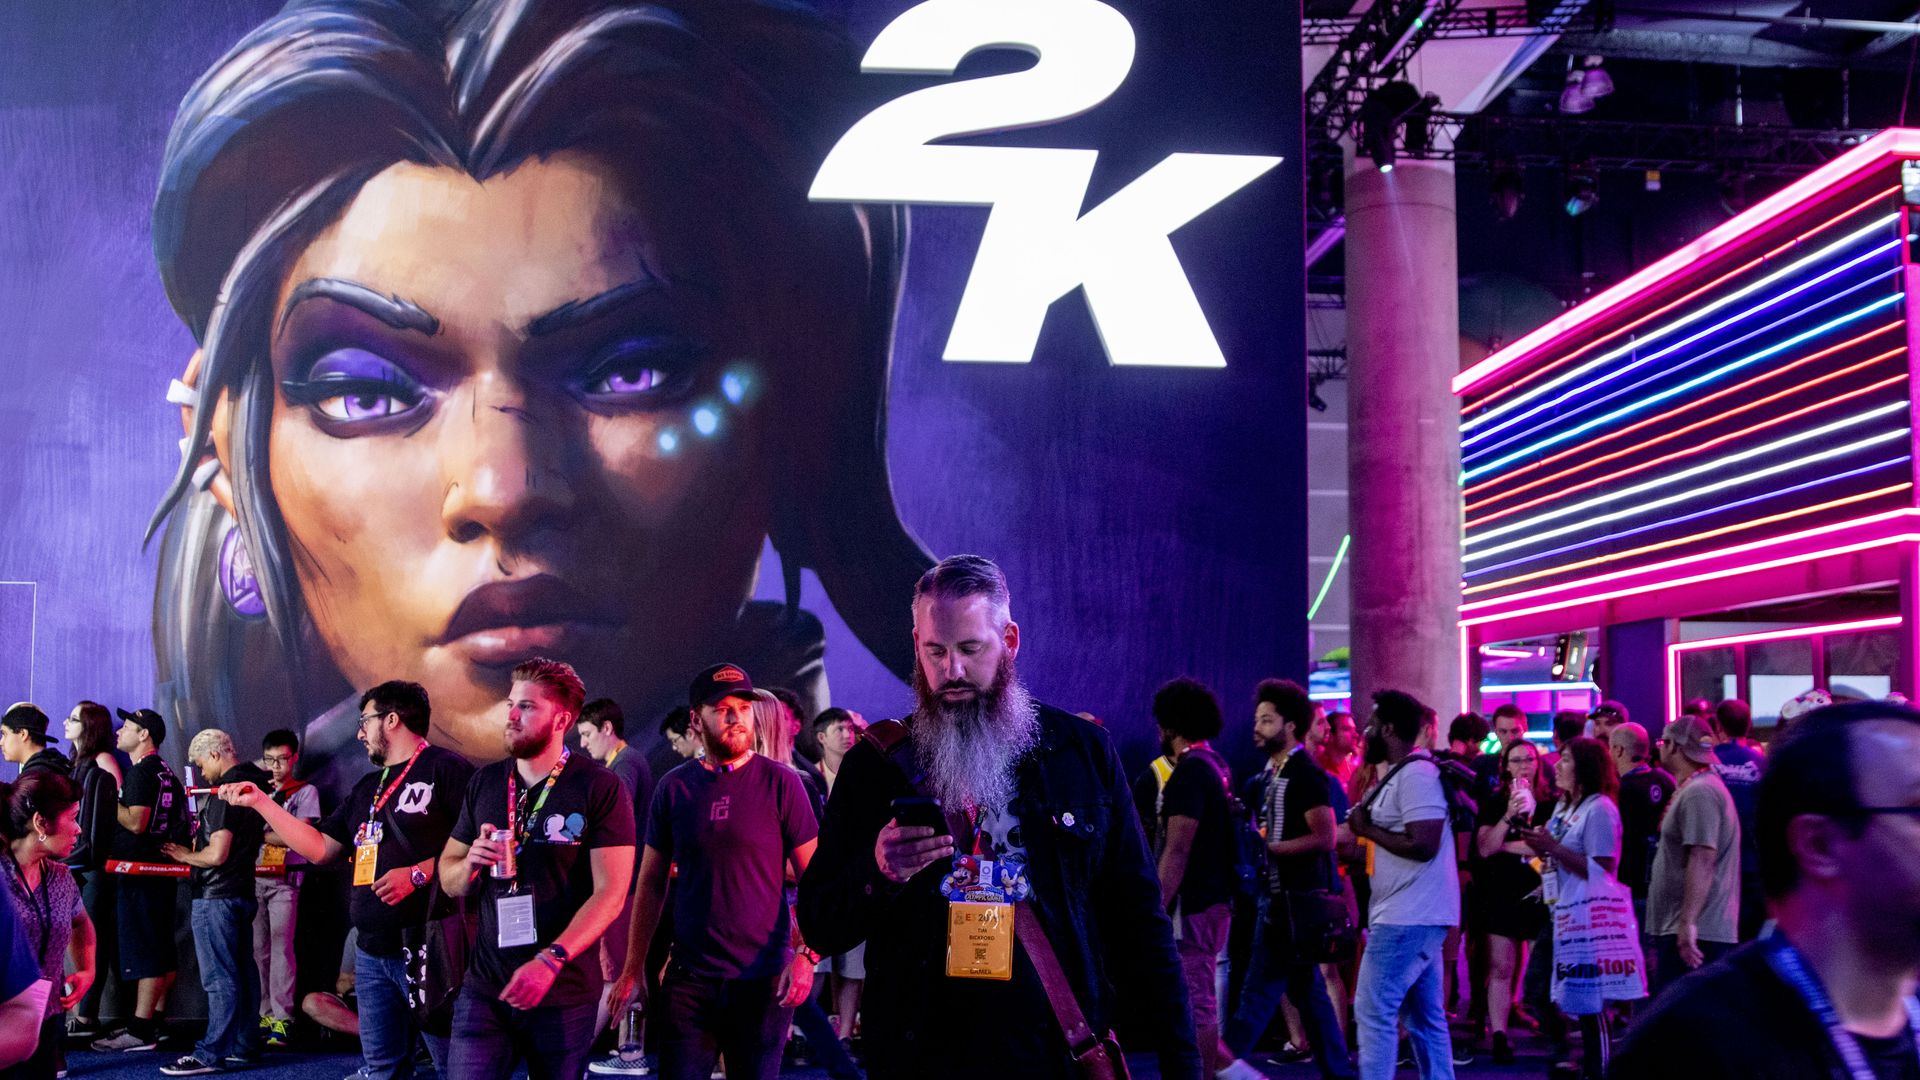 Photo of people standing in a darkened conference hall in front of a massive sign showing a woman's face and the logo for 2K Games